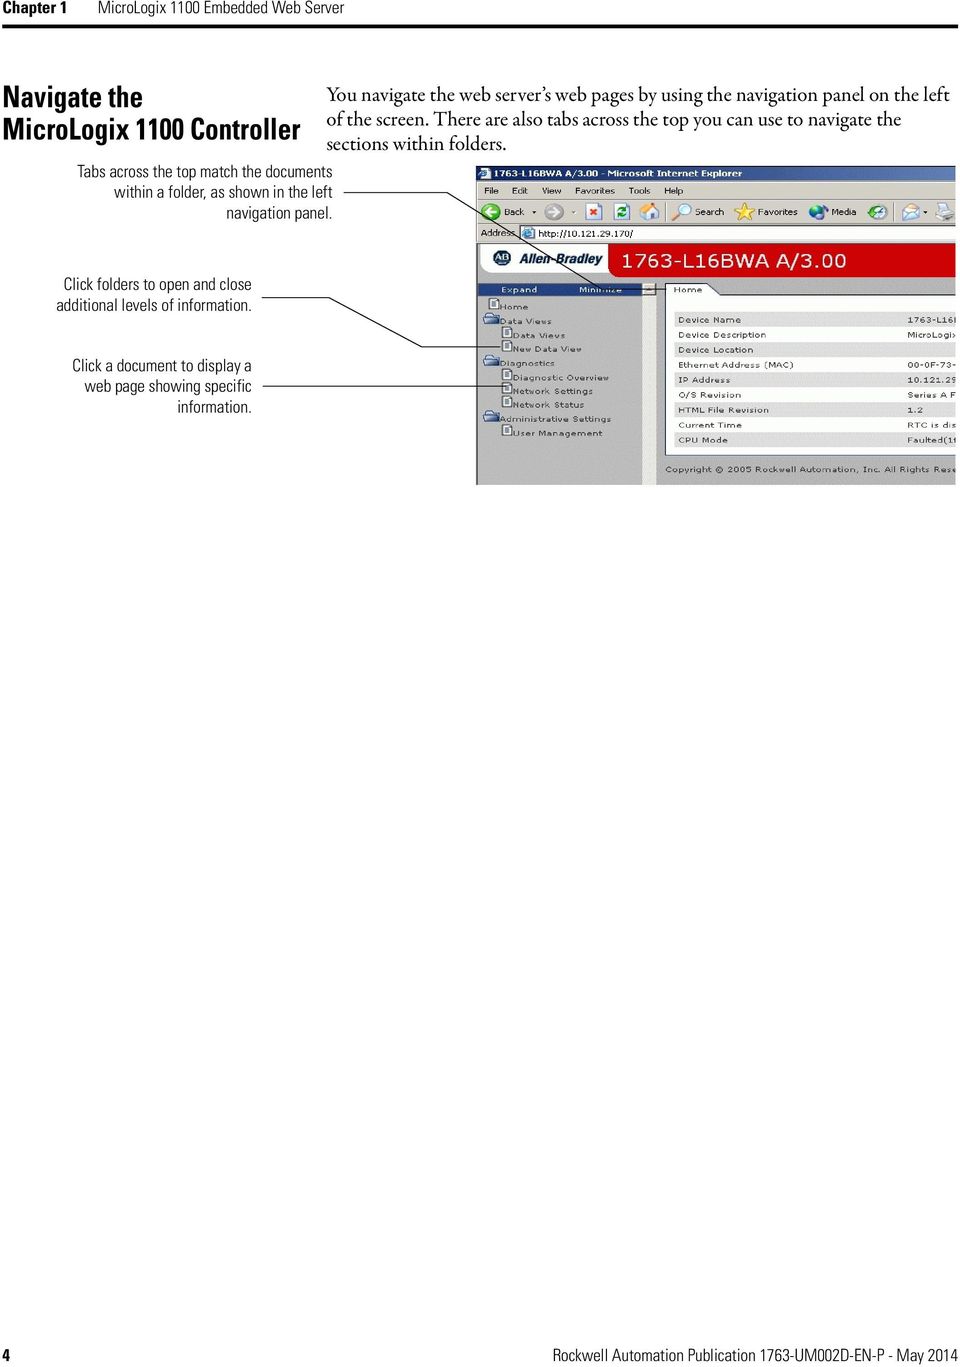 You navigate the web server s web pages by using the navigation panel on the left of the screen.